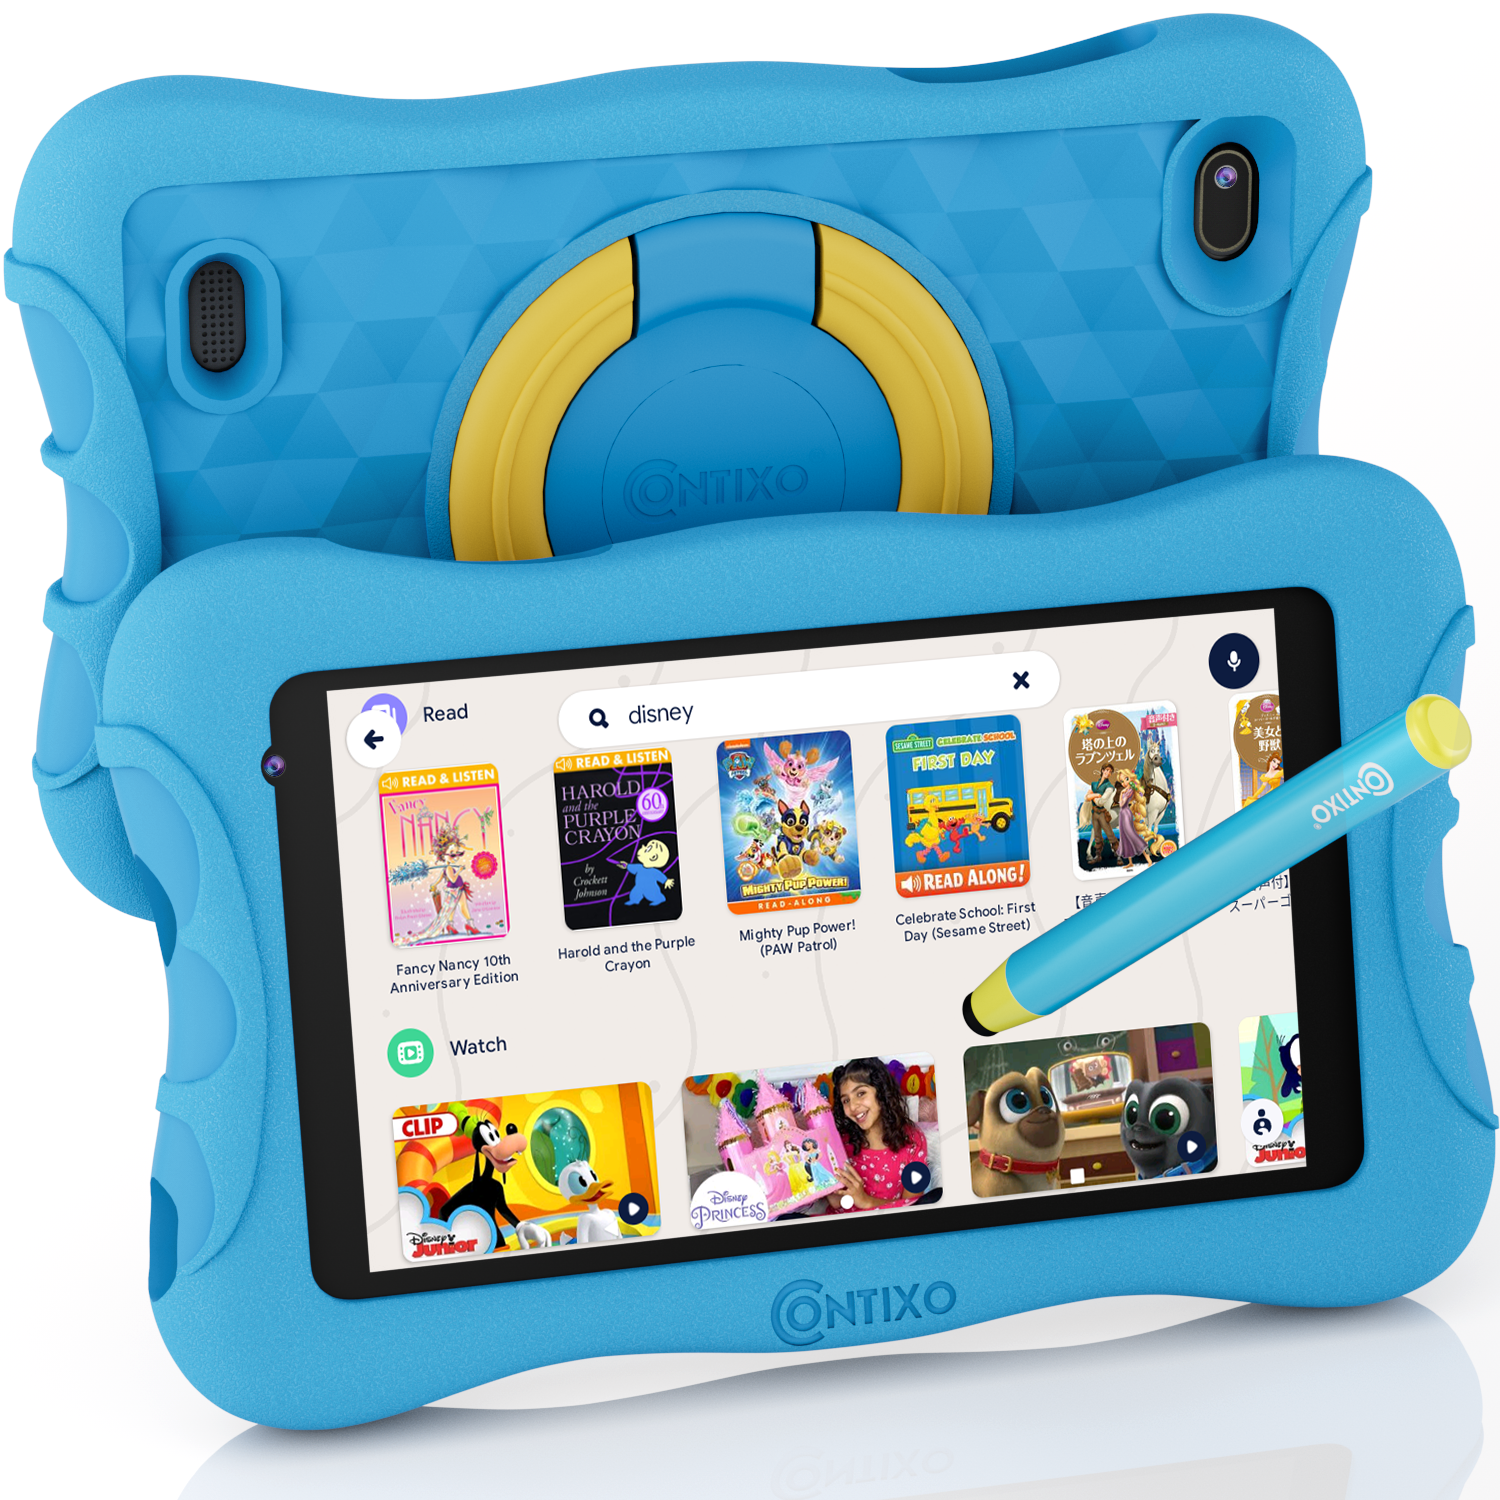 Kids Tablet, Toddler Tablet, 7 Tableta for Boys Girls, 32GB ROM 2GB RAM  Android 10 Tablet, WiFi Dual Camera Safety Eye Protection Screen, Parental  Control APP, Latest Model Kid Tablets. 